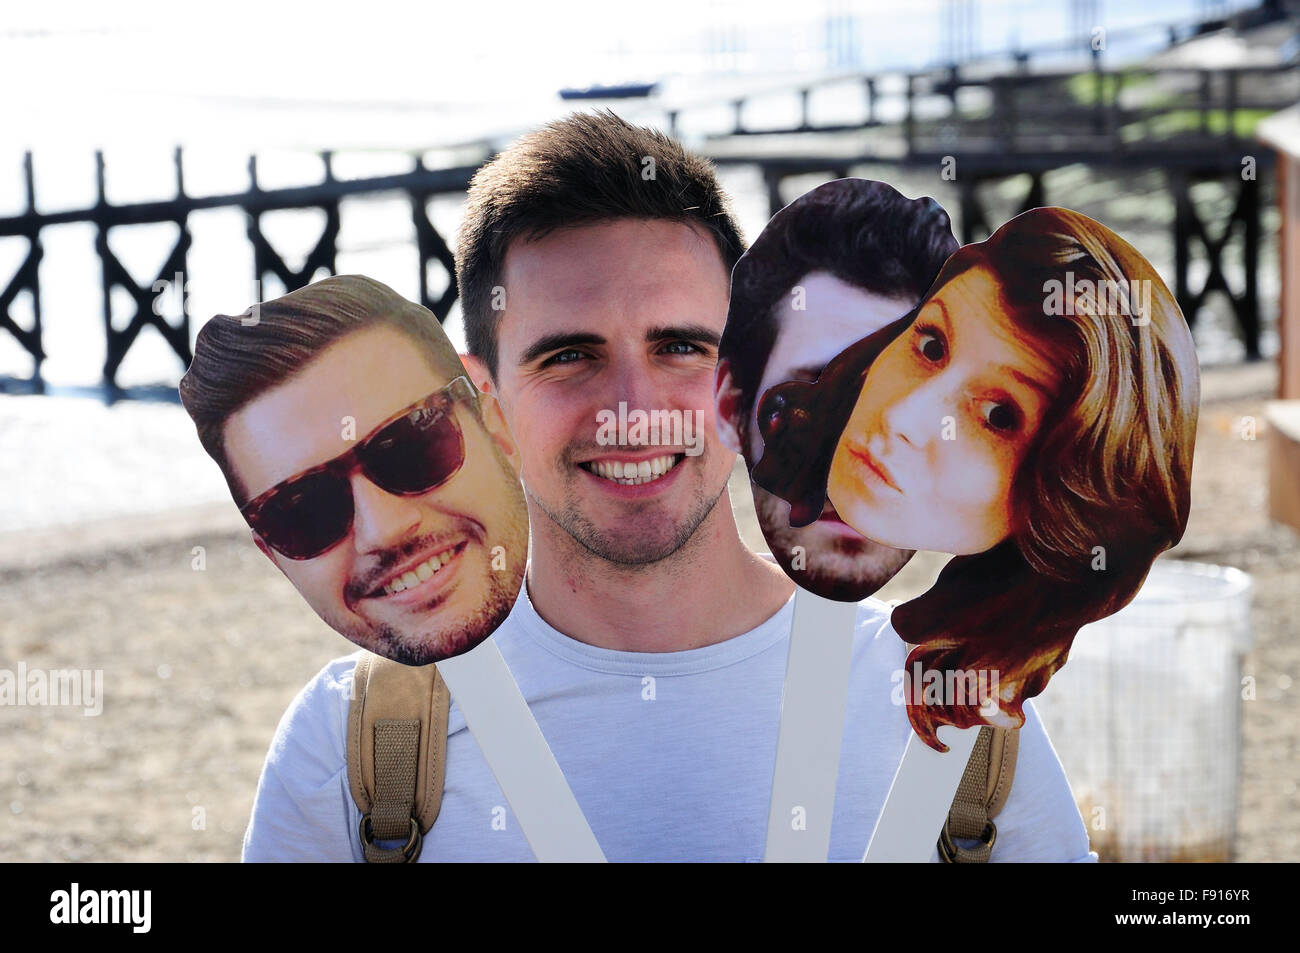 Young man holding fun face masks on beach, Southend-On-Sea, Essex, England, United Kingdom Stock Photo